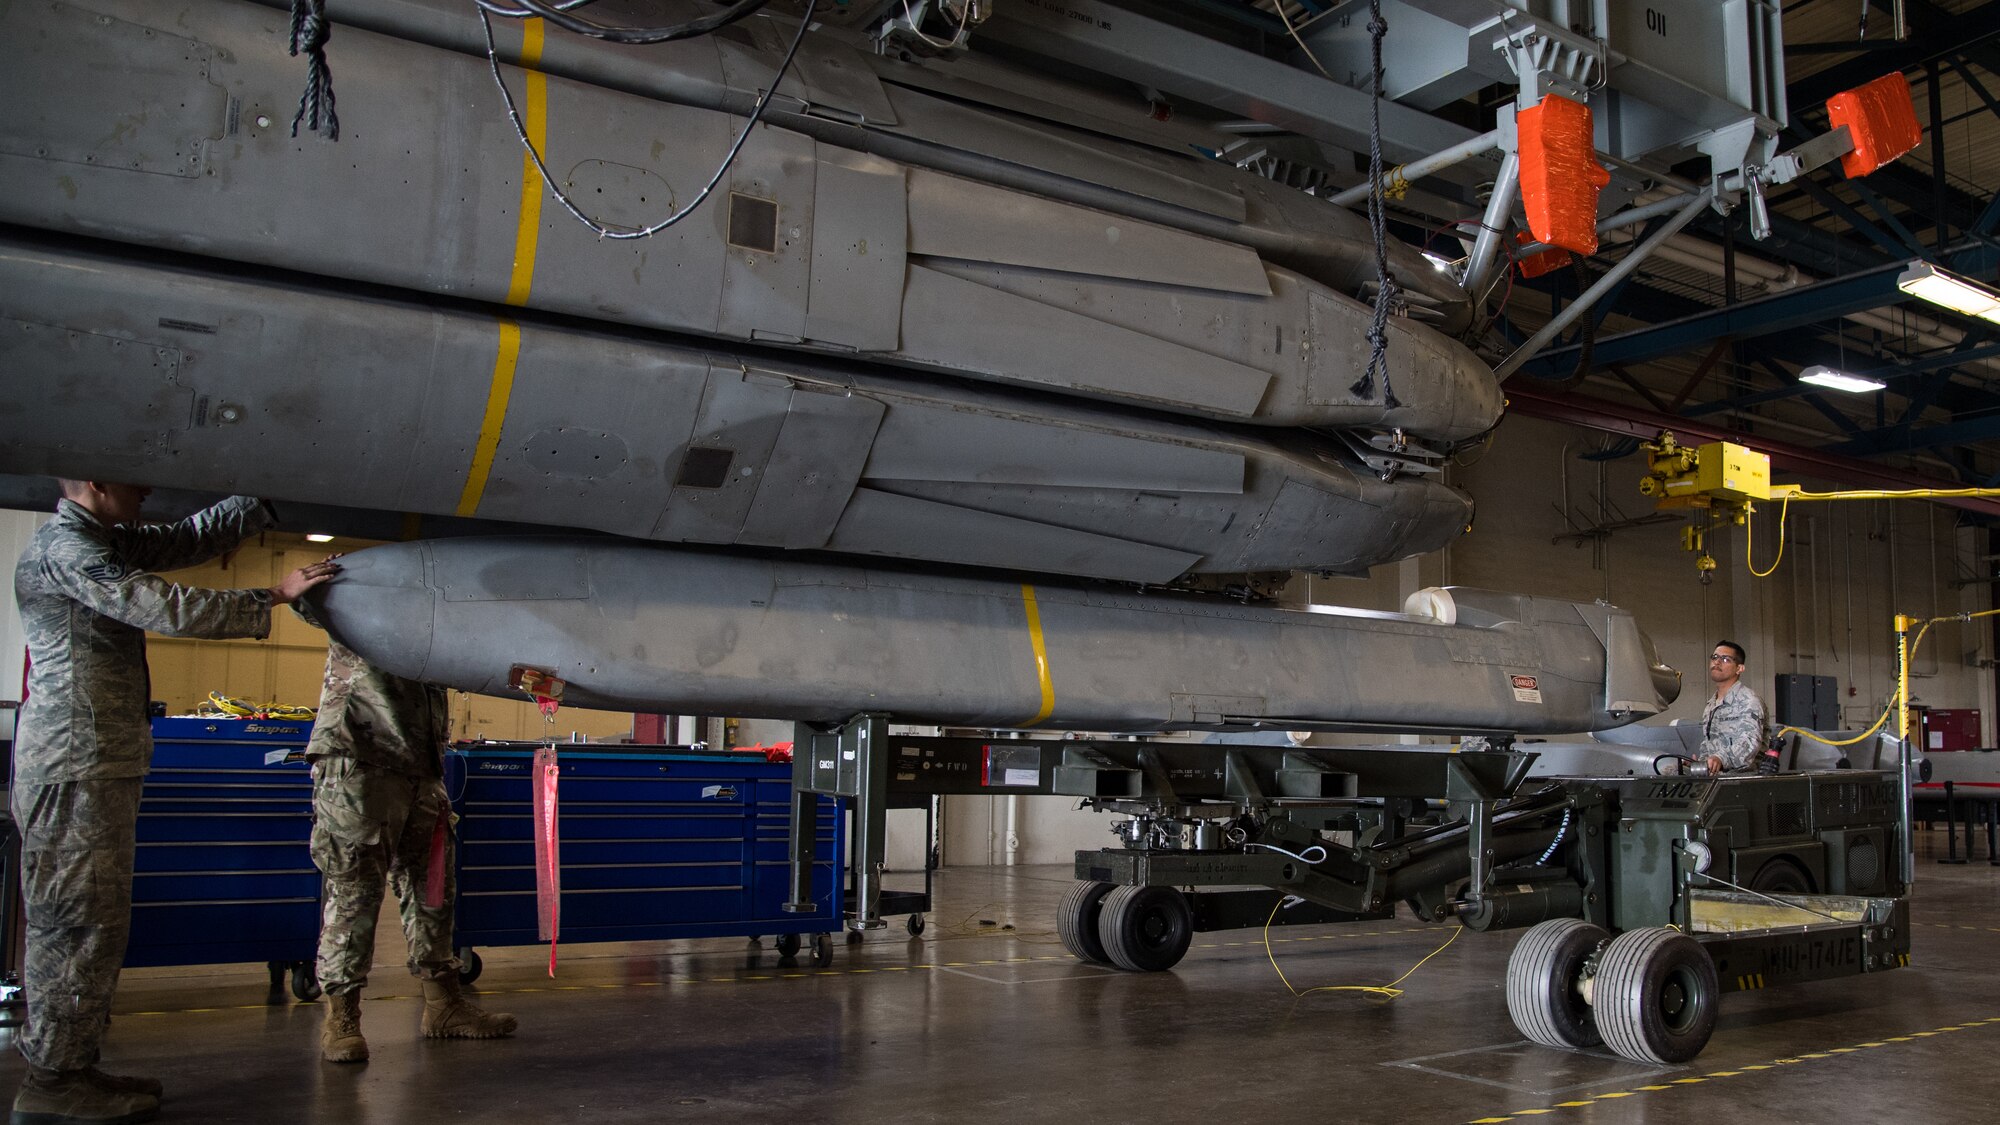 Airmen from the 2nd Munitions Squadron transport the final Conventional Air-launched Cruise Missile (CALCM) to be demilitarized at Barksdale Air Force Base, La., Nov. 20, 2019. The CALCM missile package was first operationally used in 1991 during Operation Secret Squirrel. (U.S. Air Force photo by Airman 1st Class Jacob B. Wrightsman)